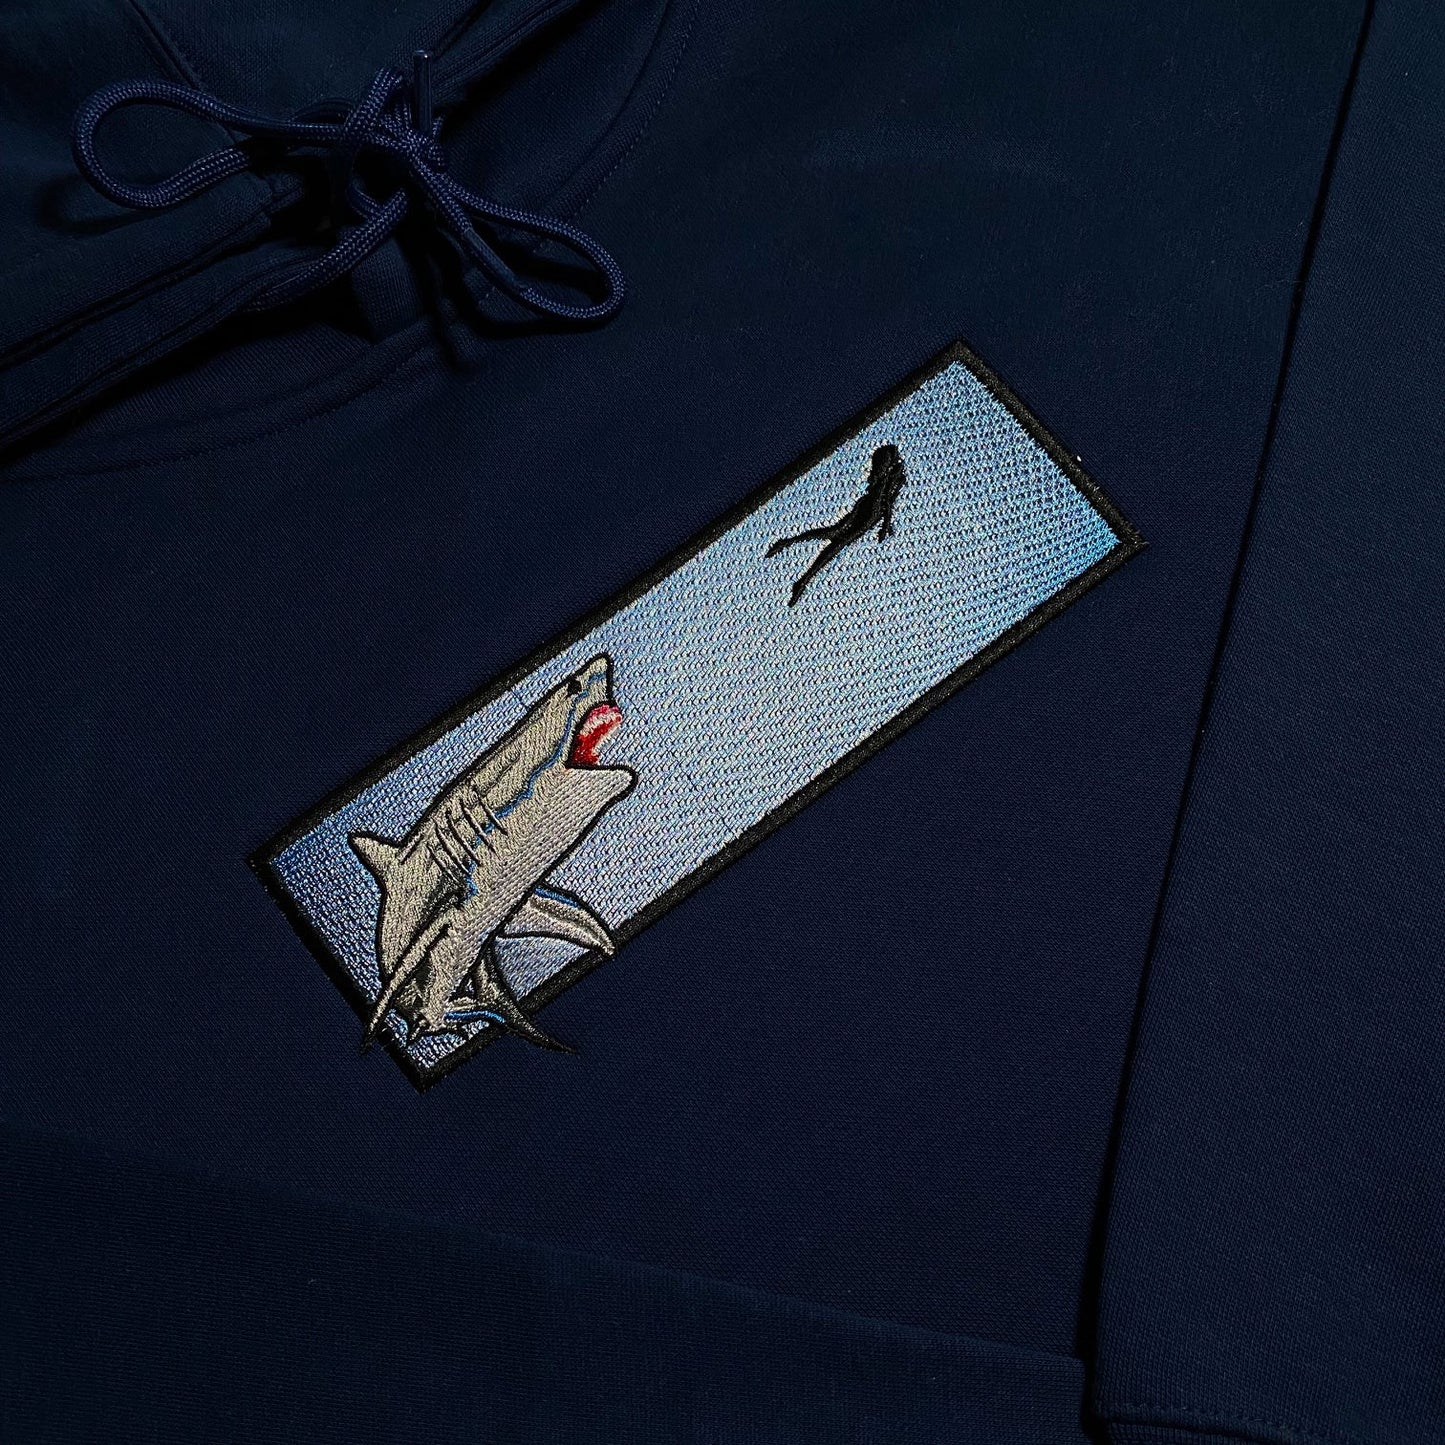 Limited Shark Attack Streetwear EMBROIDERED HOODIE